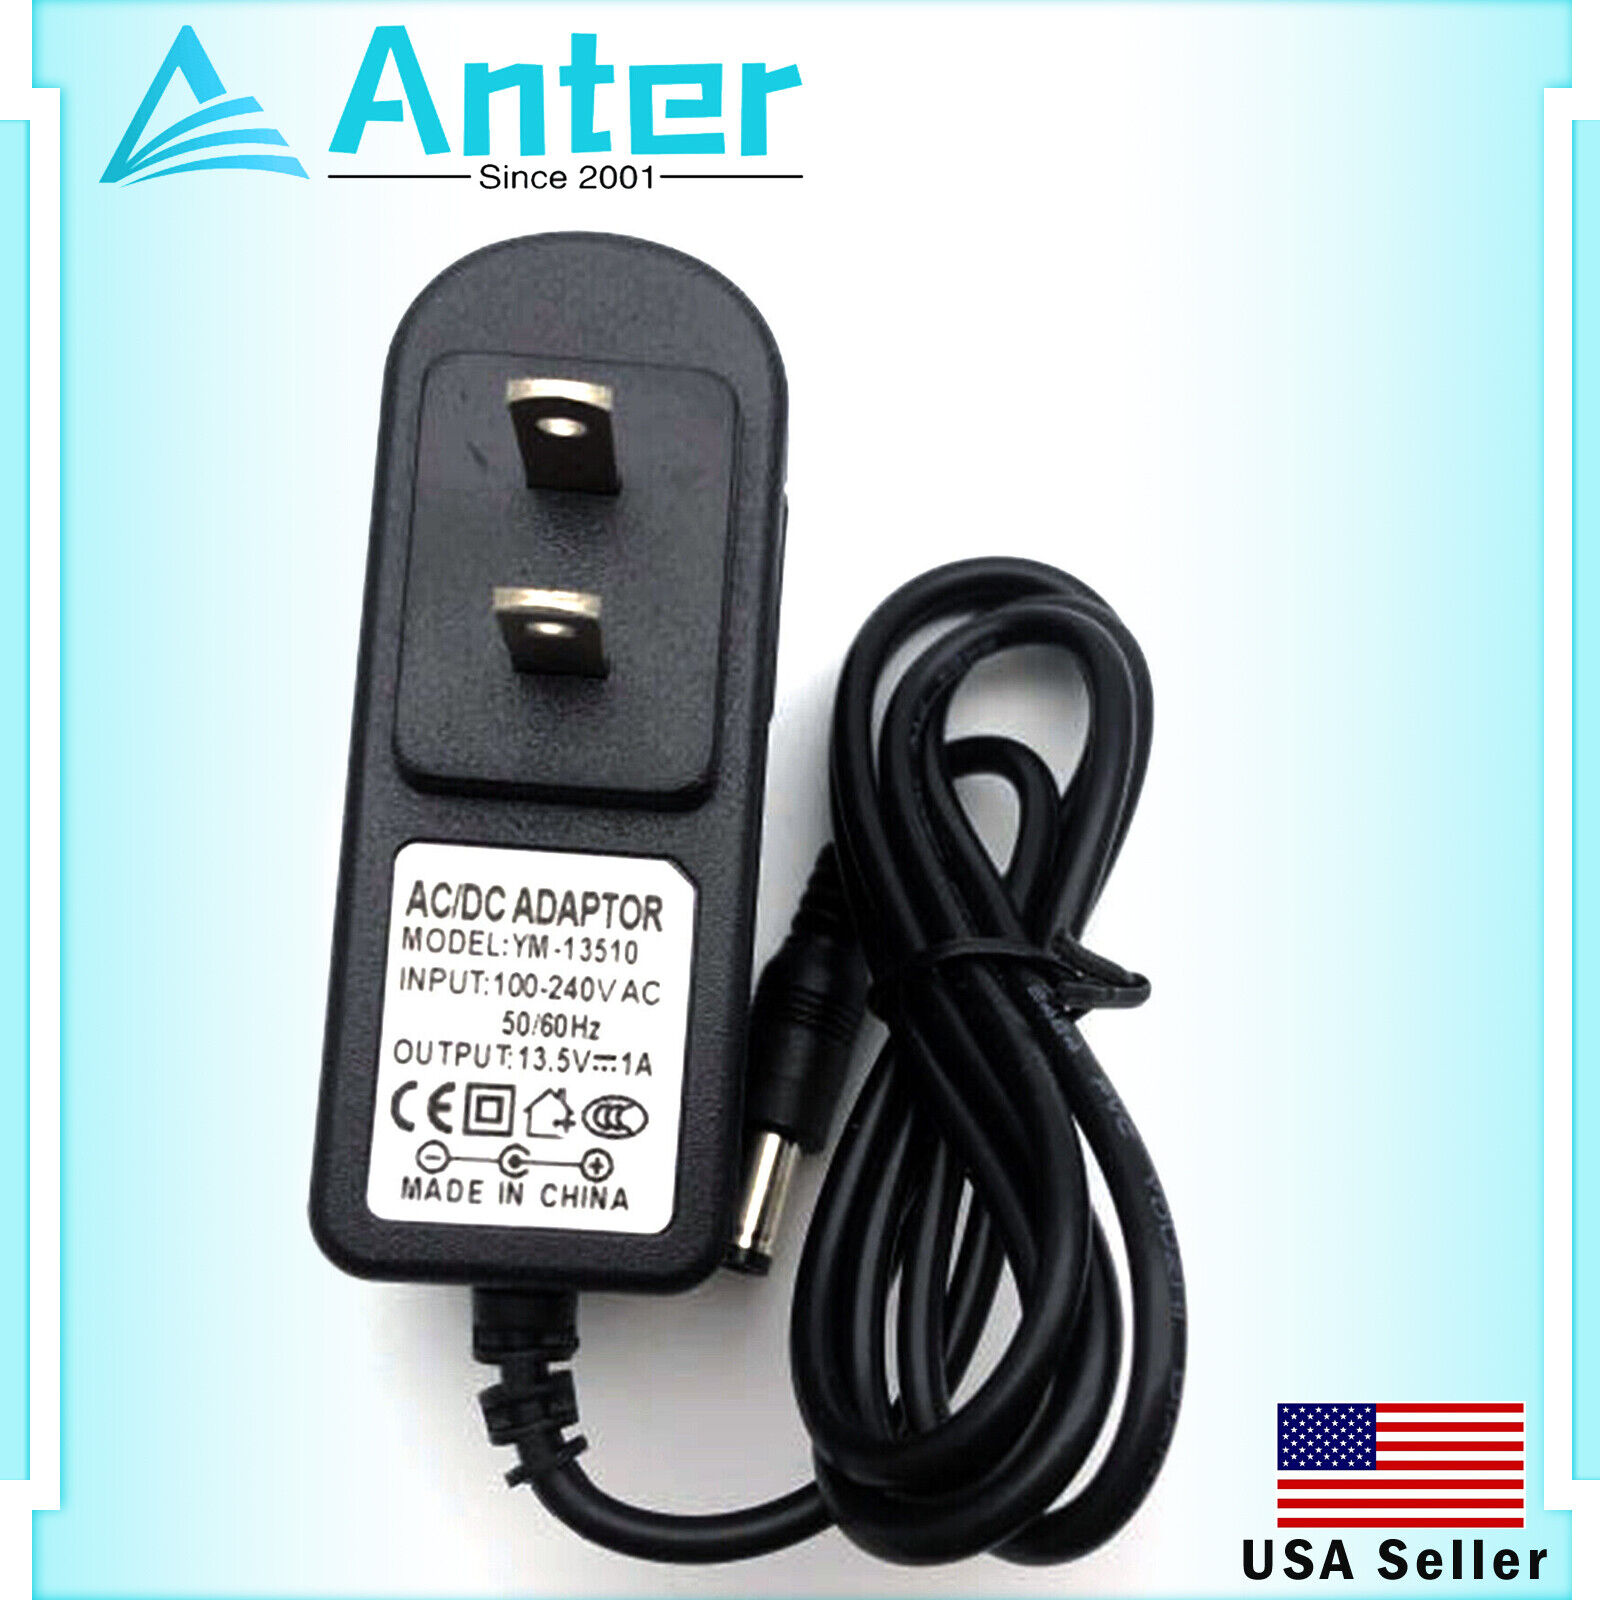 AC 100-240V Converter Adapter DC 13.5V 1A 1000mA Wall Charger Power Supply Cord